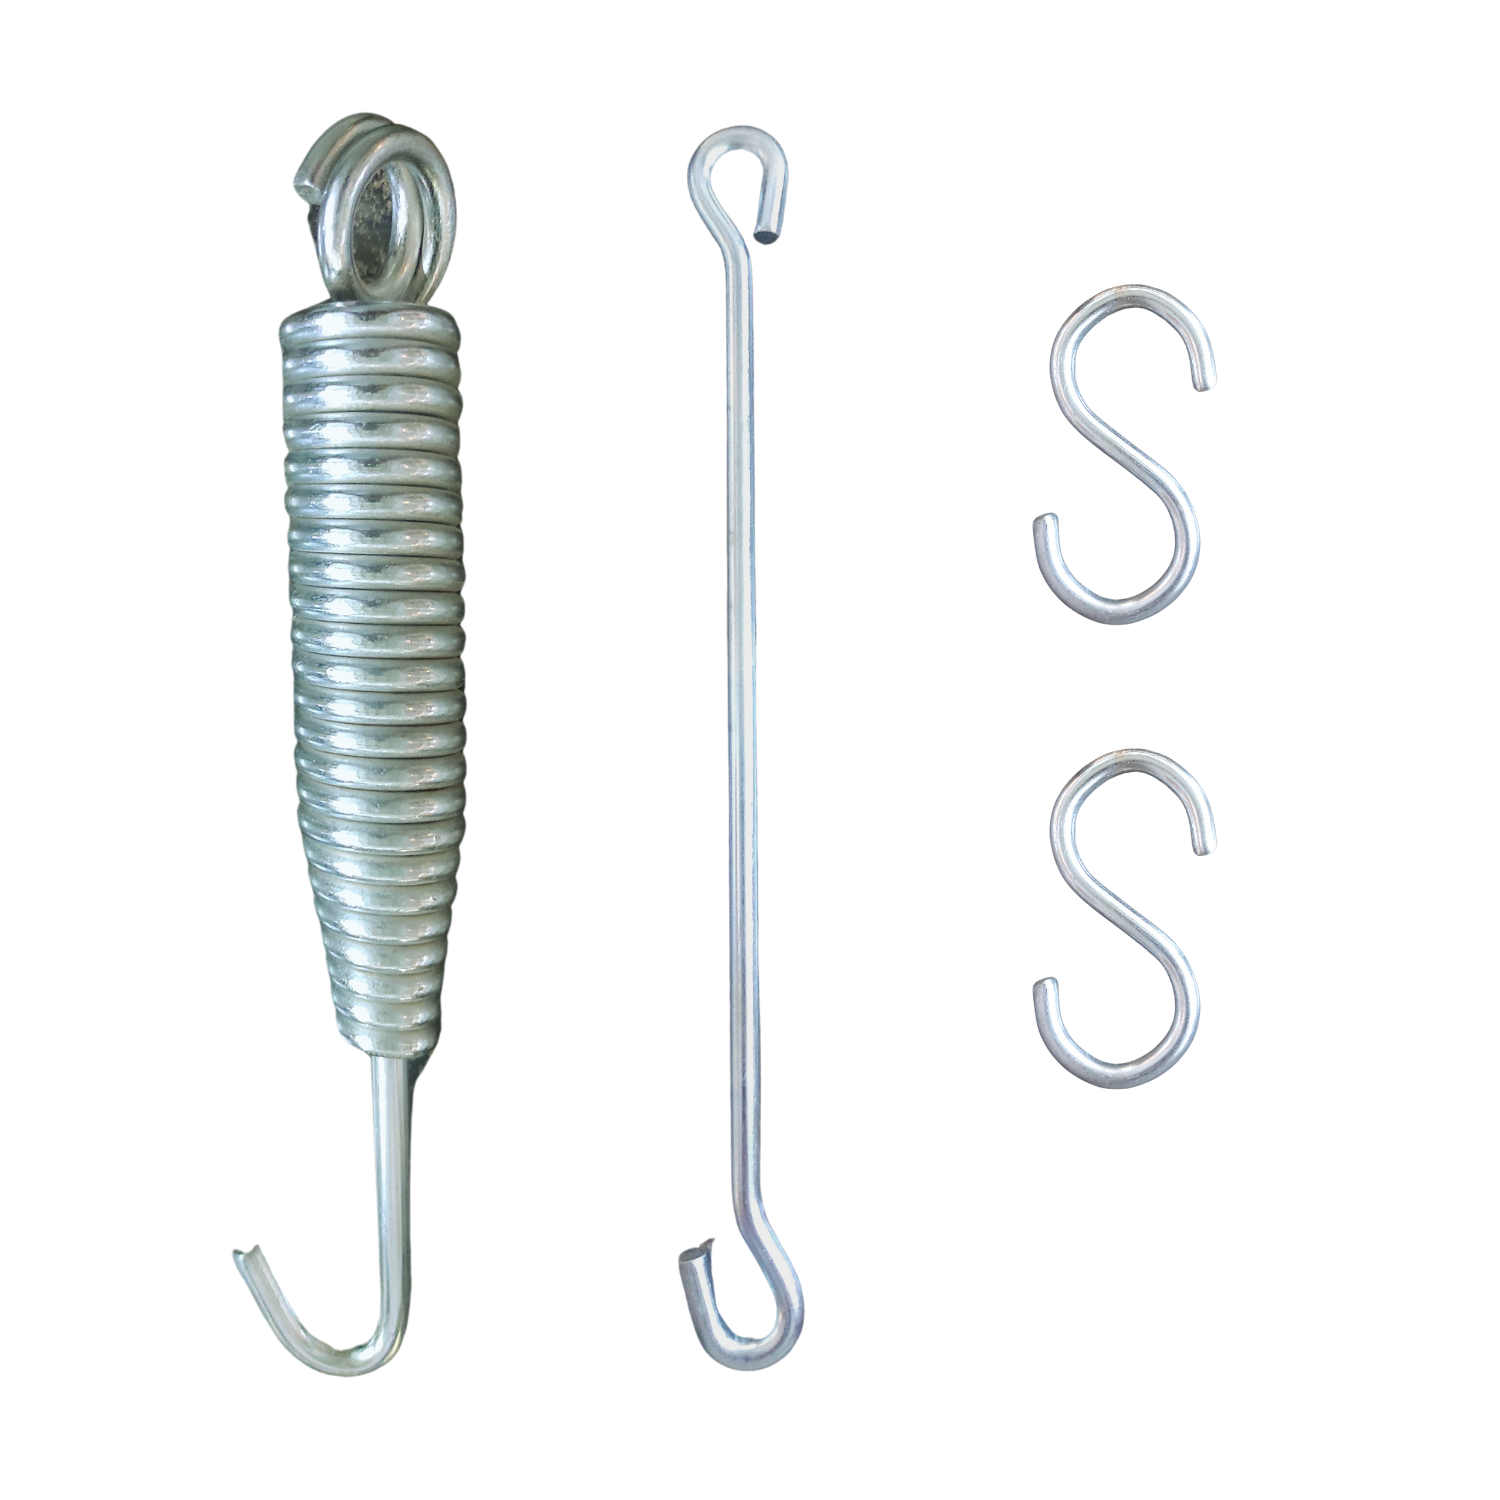 Hanging Accessories Set for Porch Swings - 1 Spring 1 Rod 2 S Hook